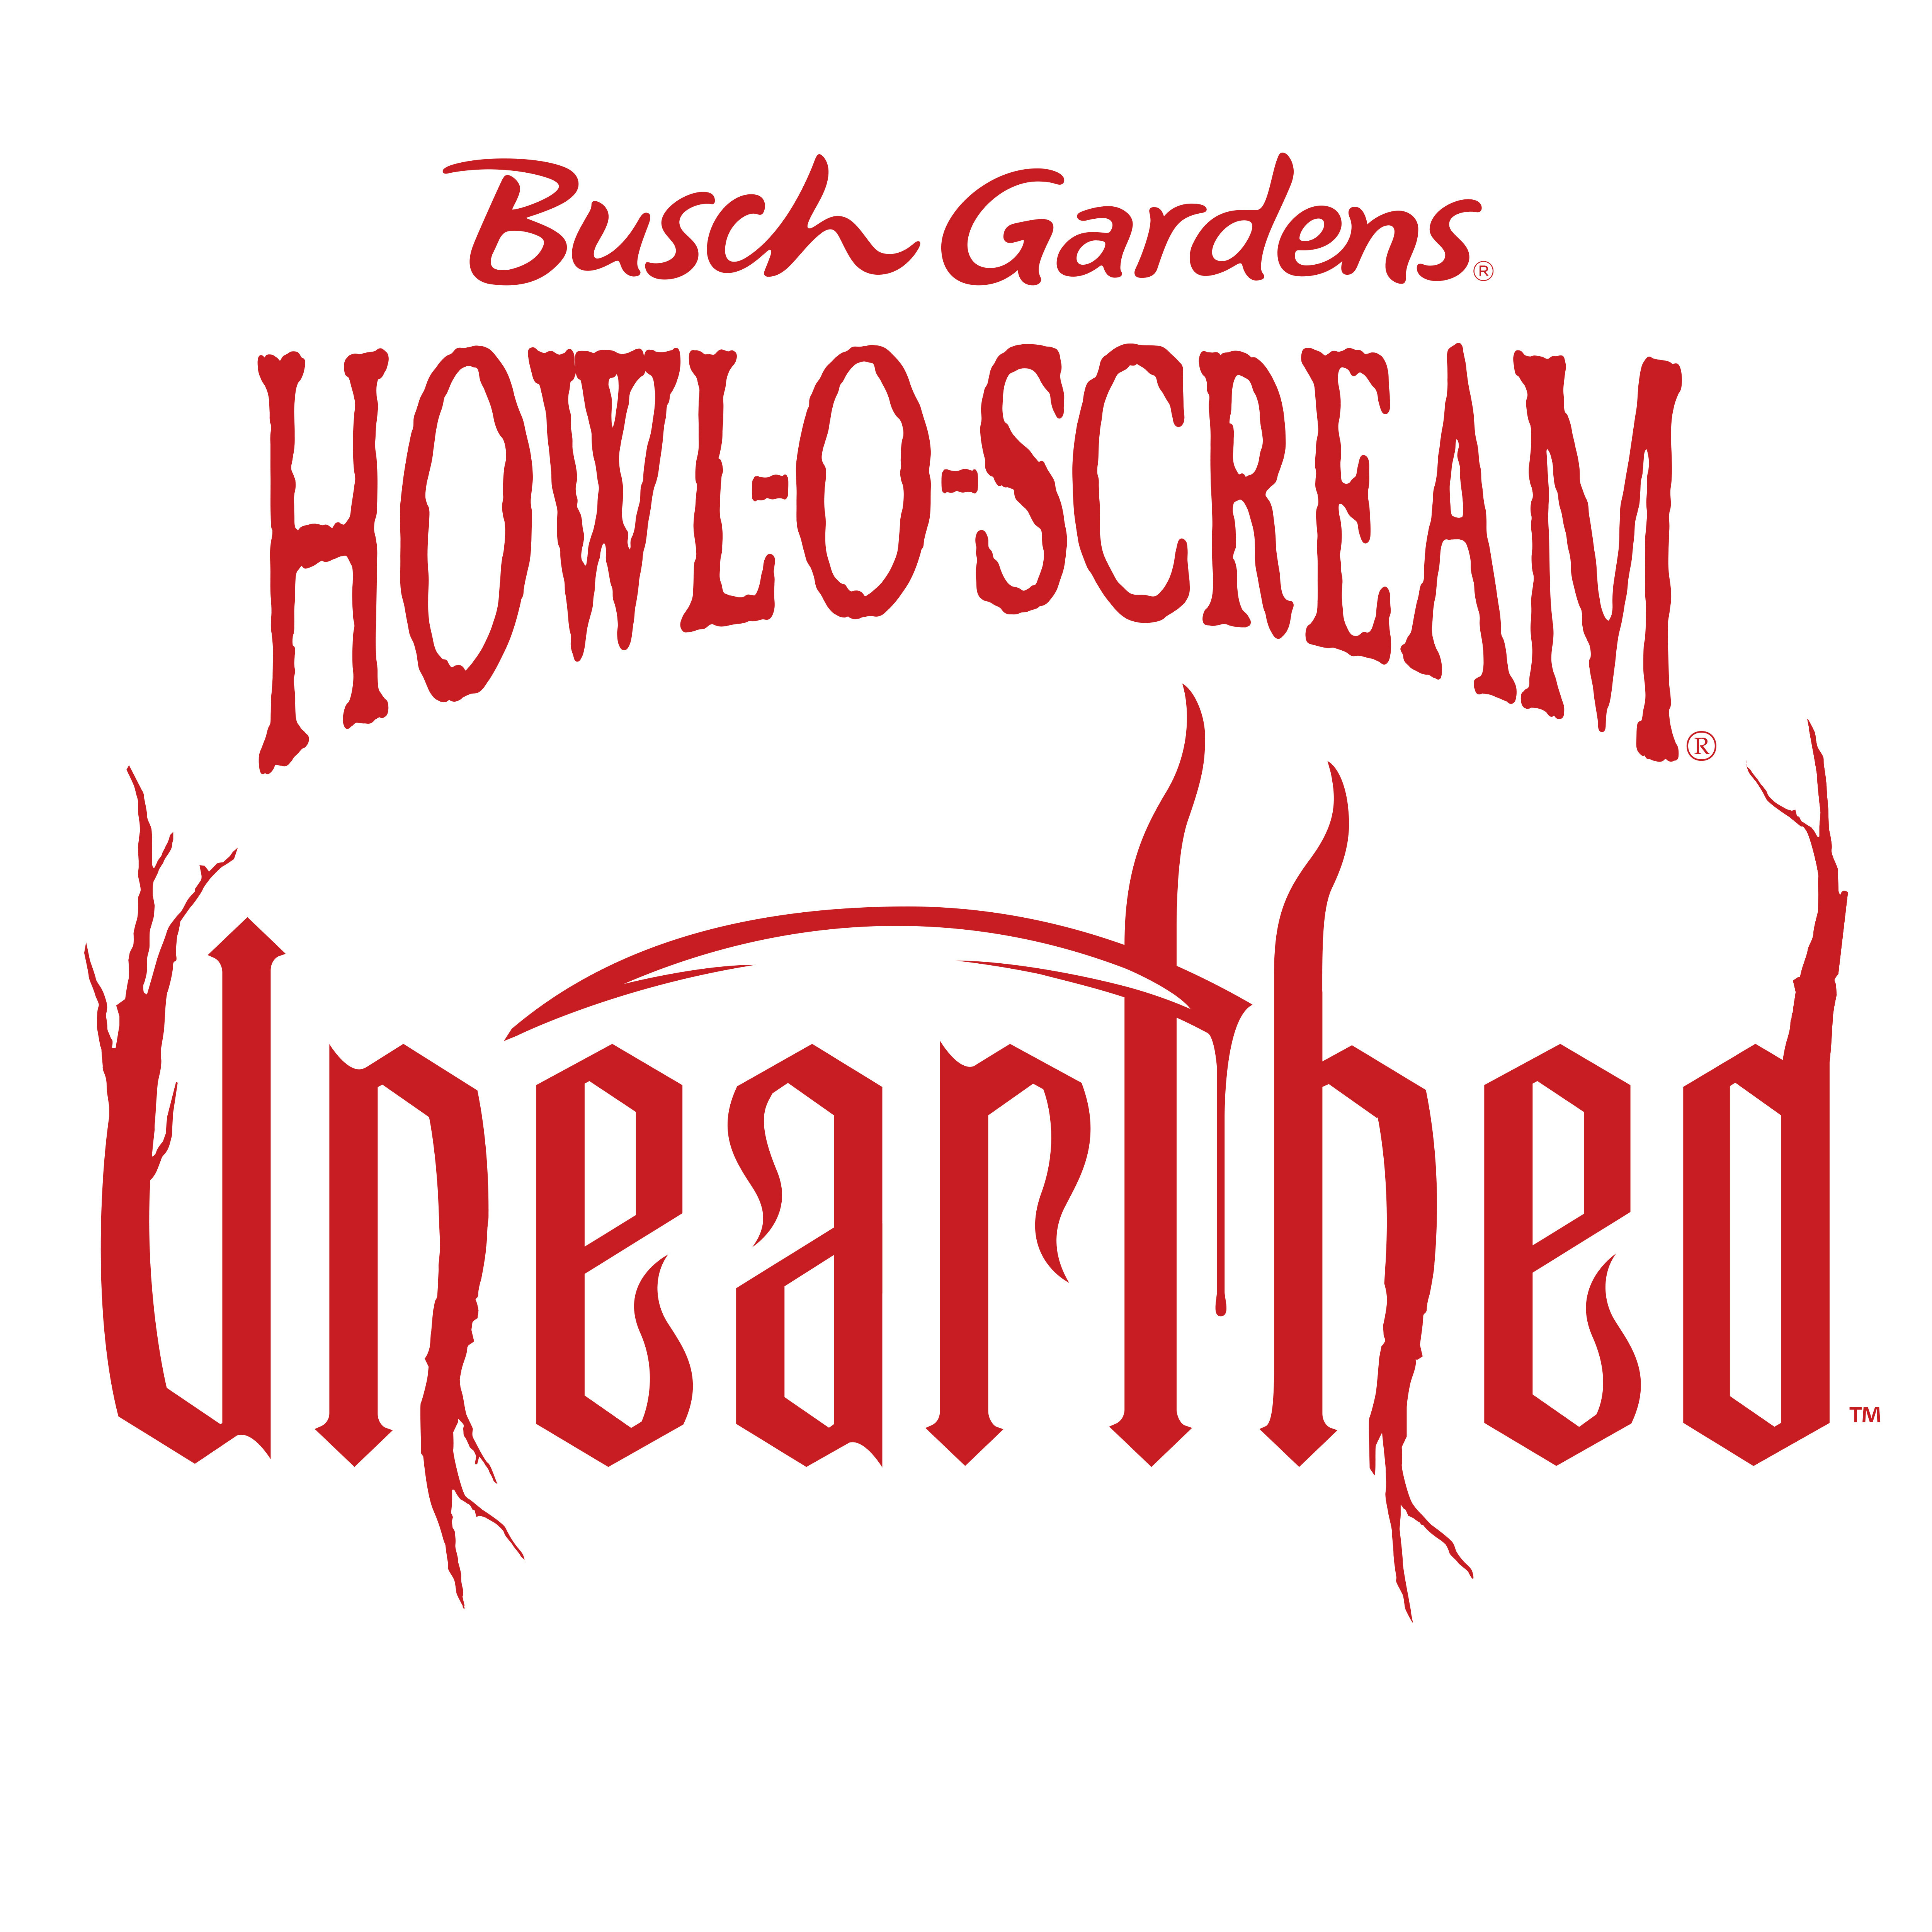 BUSCH GARDENS® HOWL-O-SCREAM® HORRORS UNEARTHED